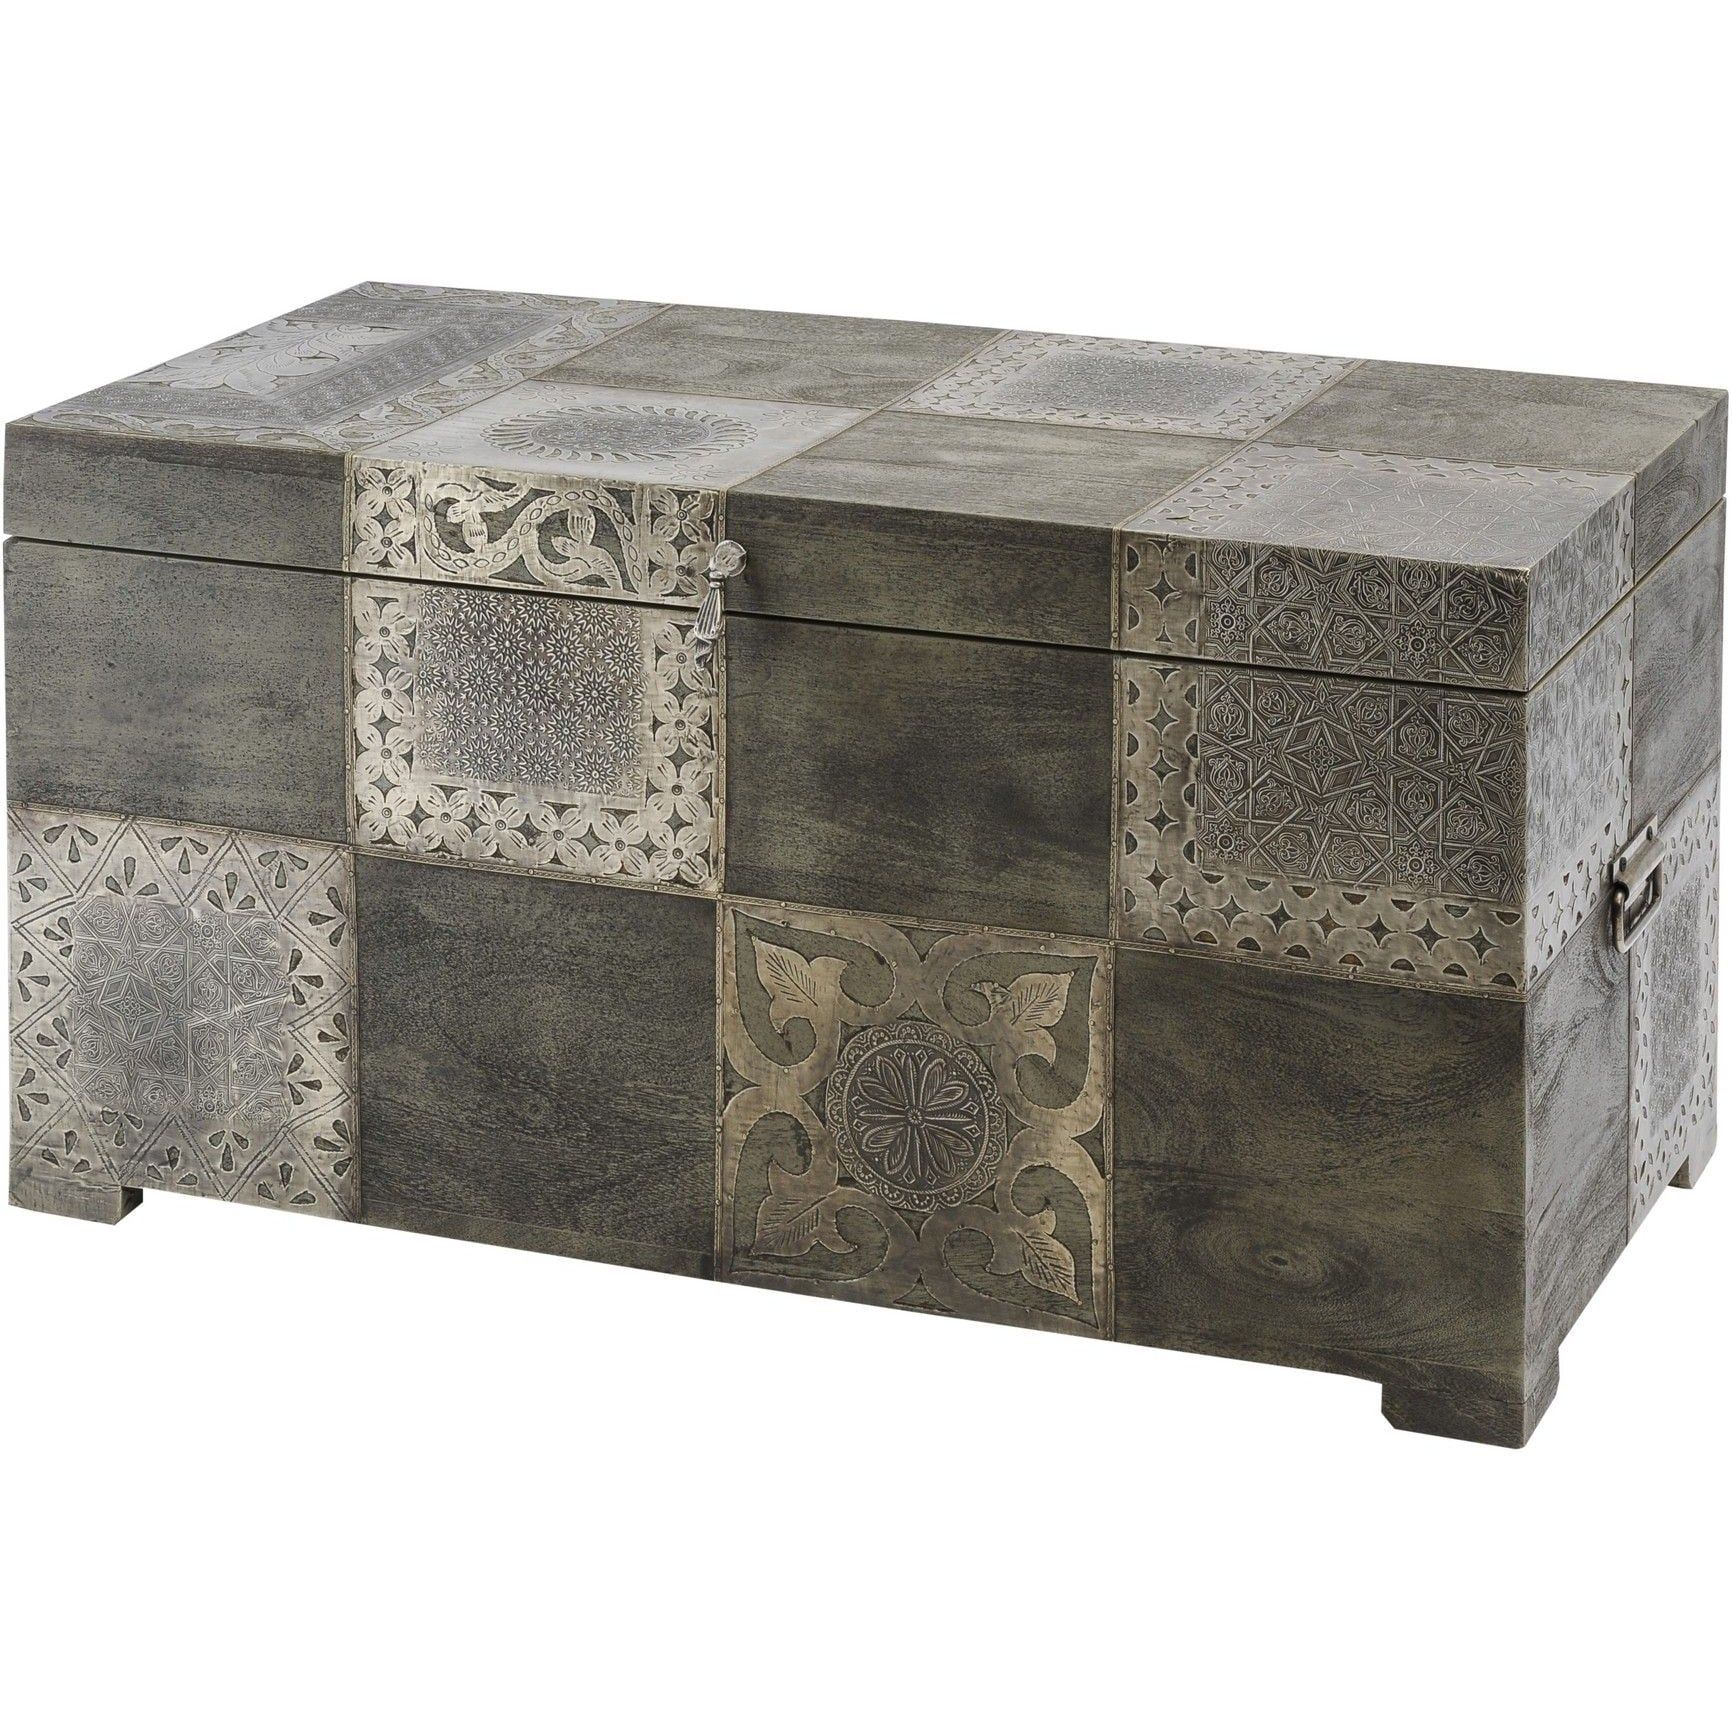 Storage Trunk | Storage Coffee Table | Swanky Interiors For Espresso Wood Trunk Cocktail Tables (View 11 of 15)